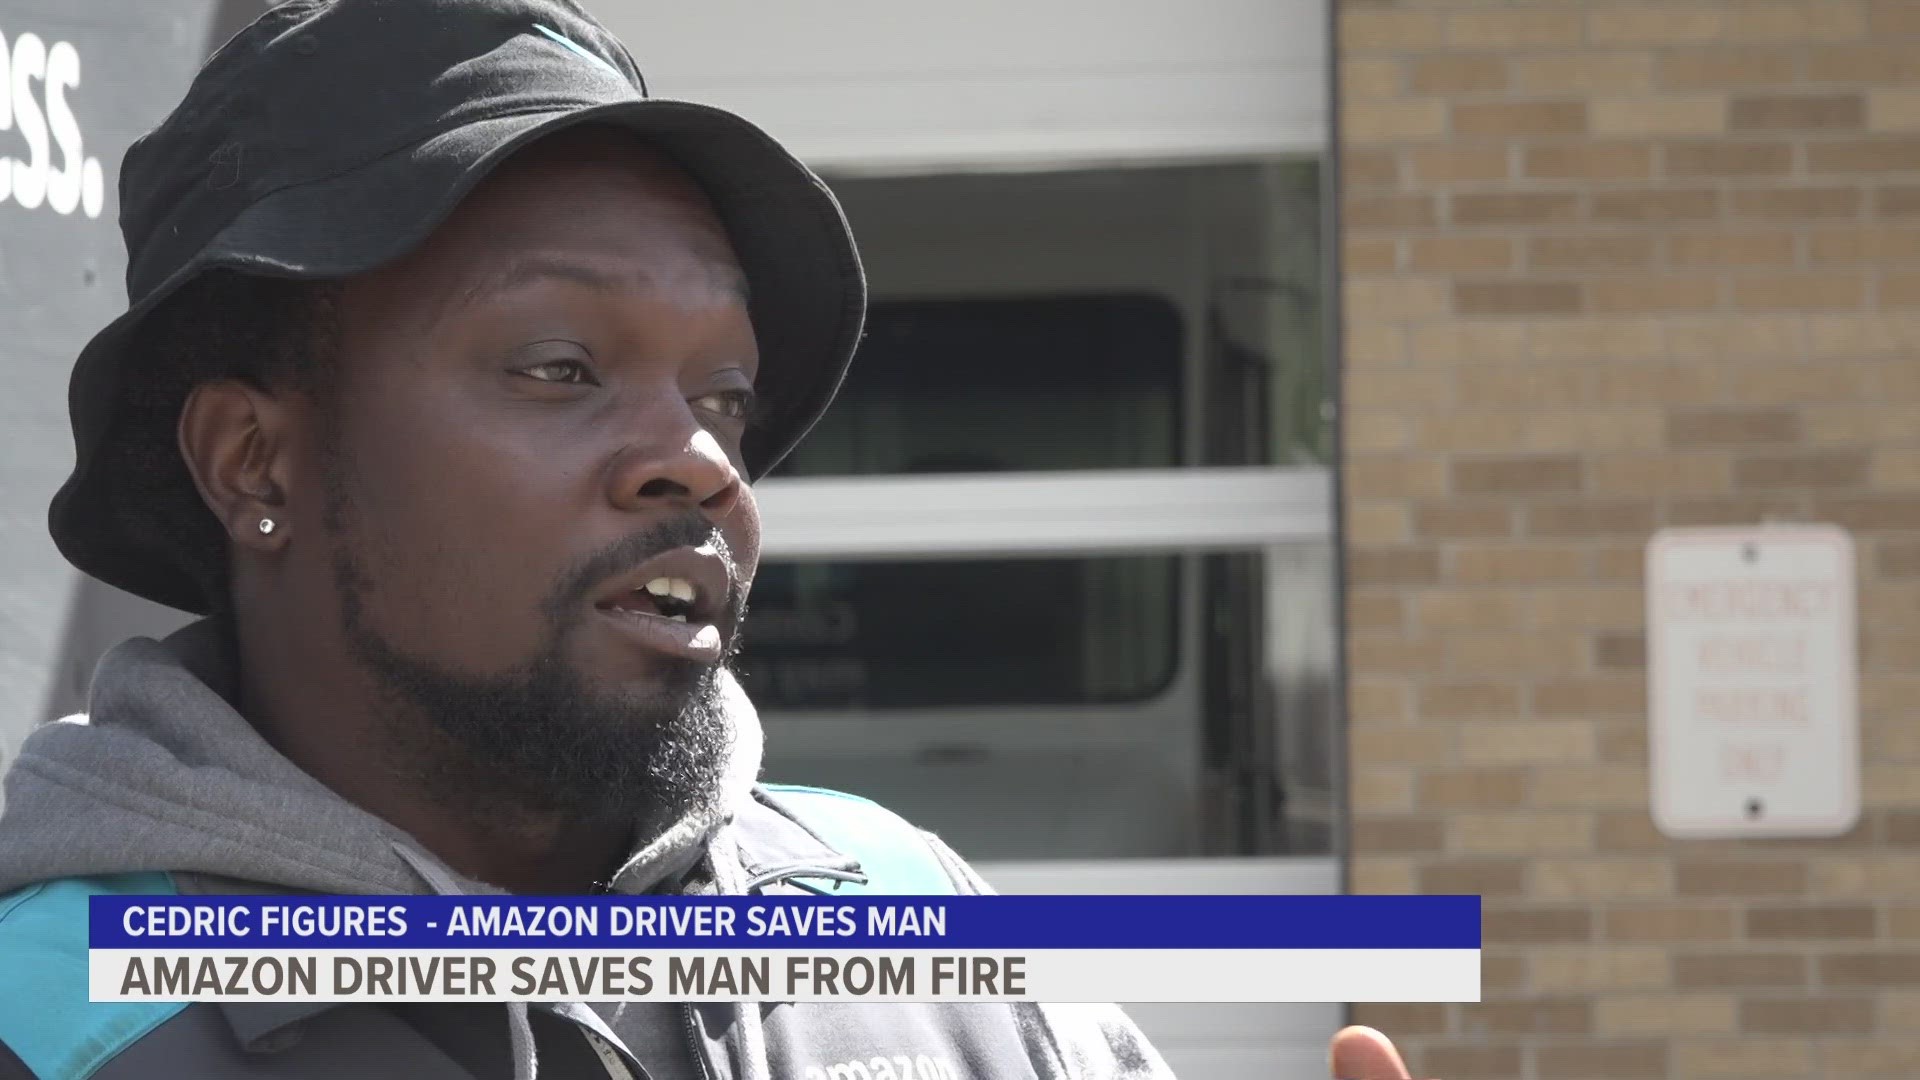 While making deliveries Cedric Figures noticed a house was on fire. He saved an elderly man and put out the fire before continuing on his route.